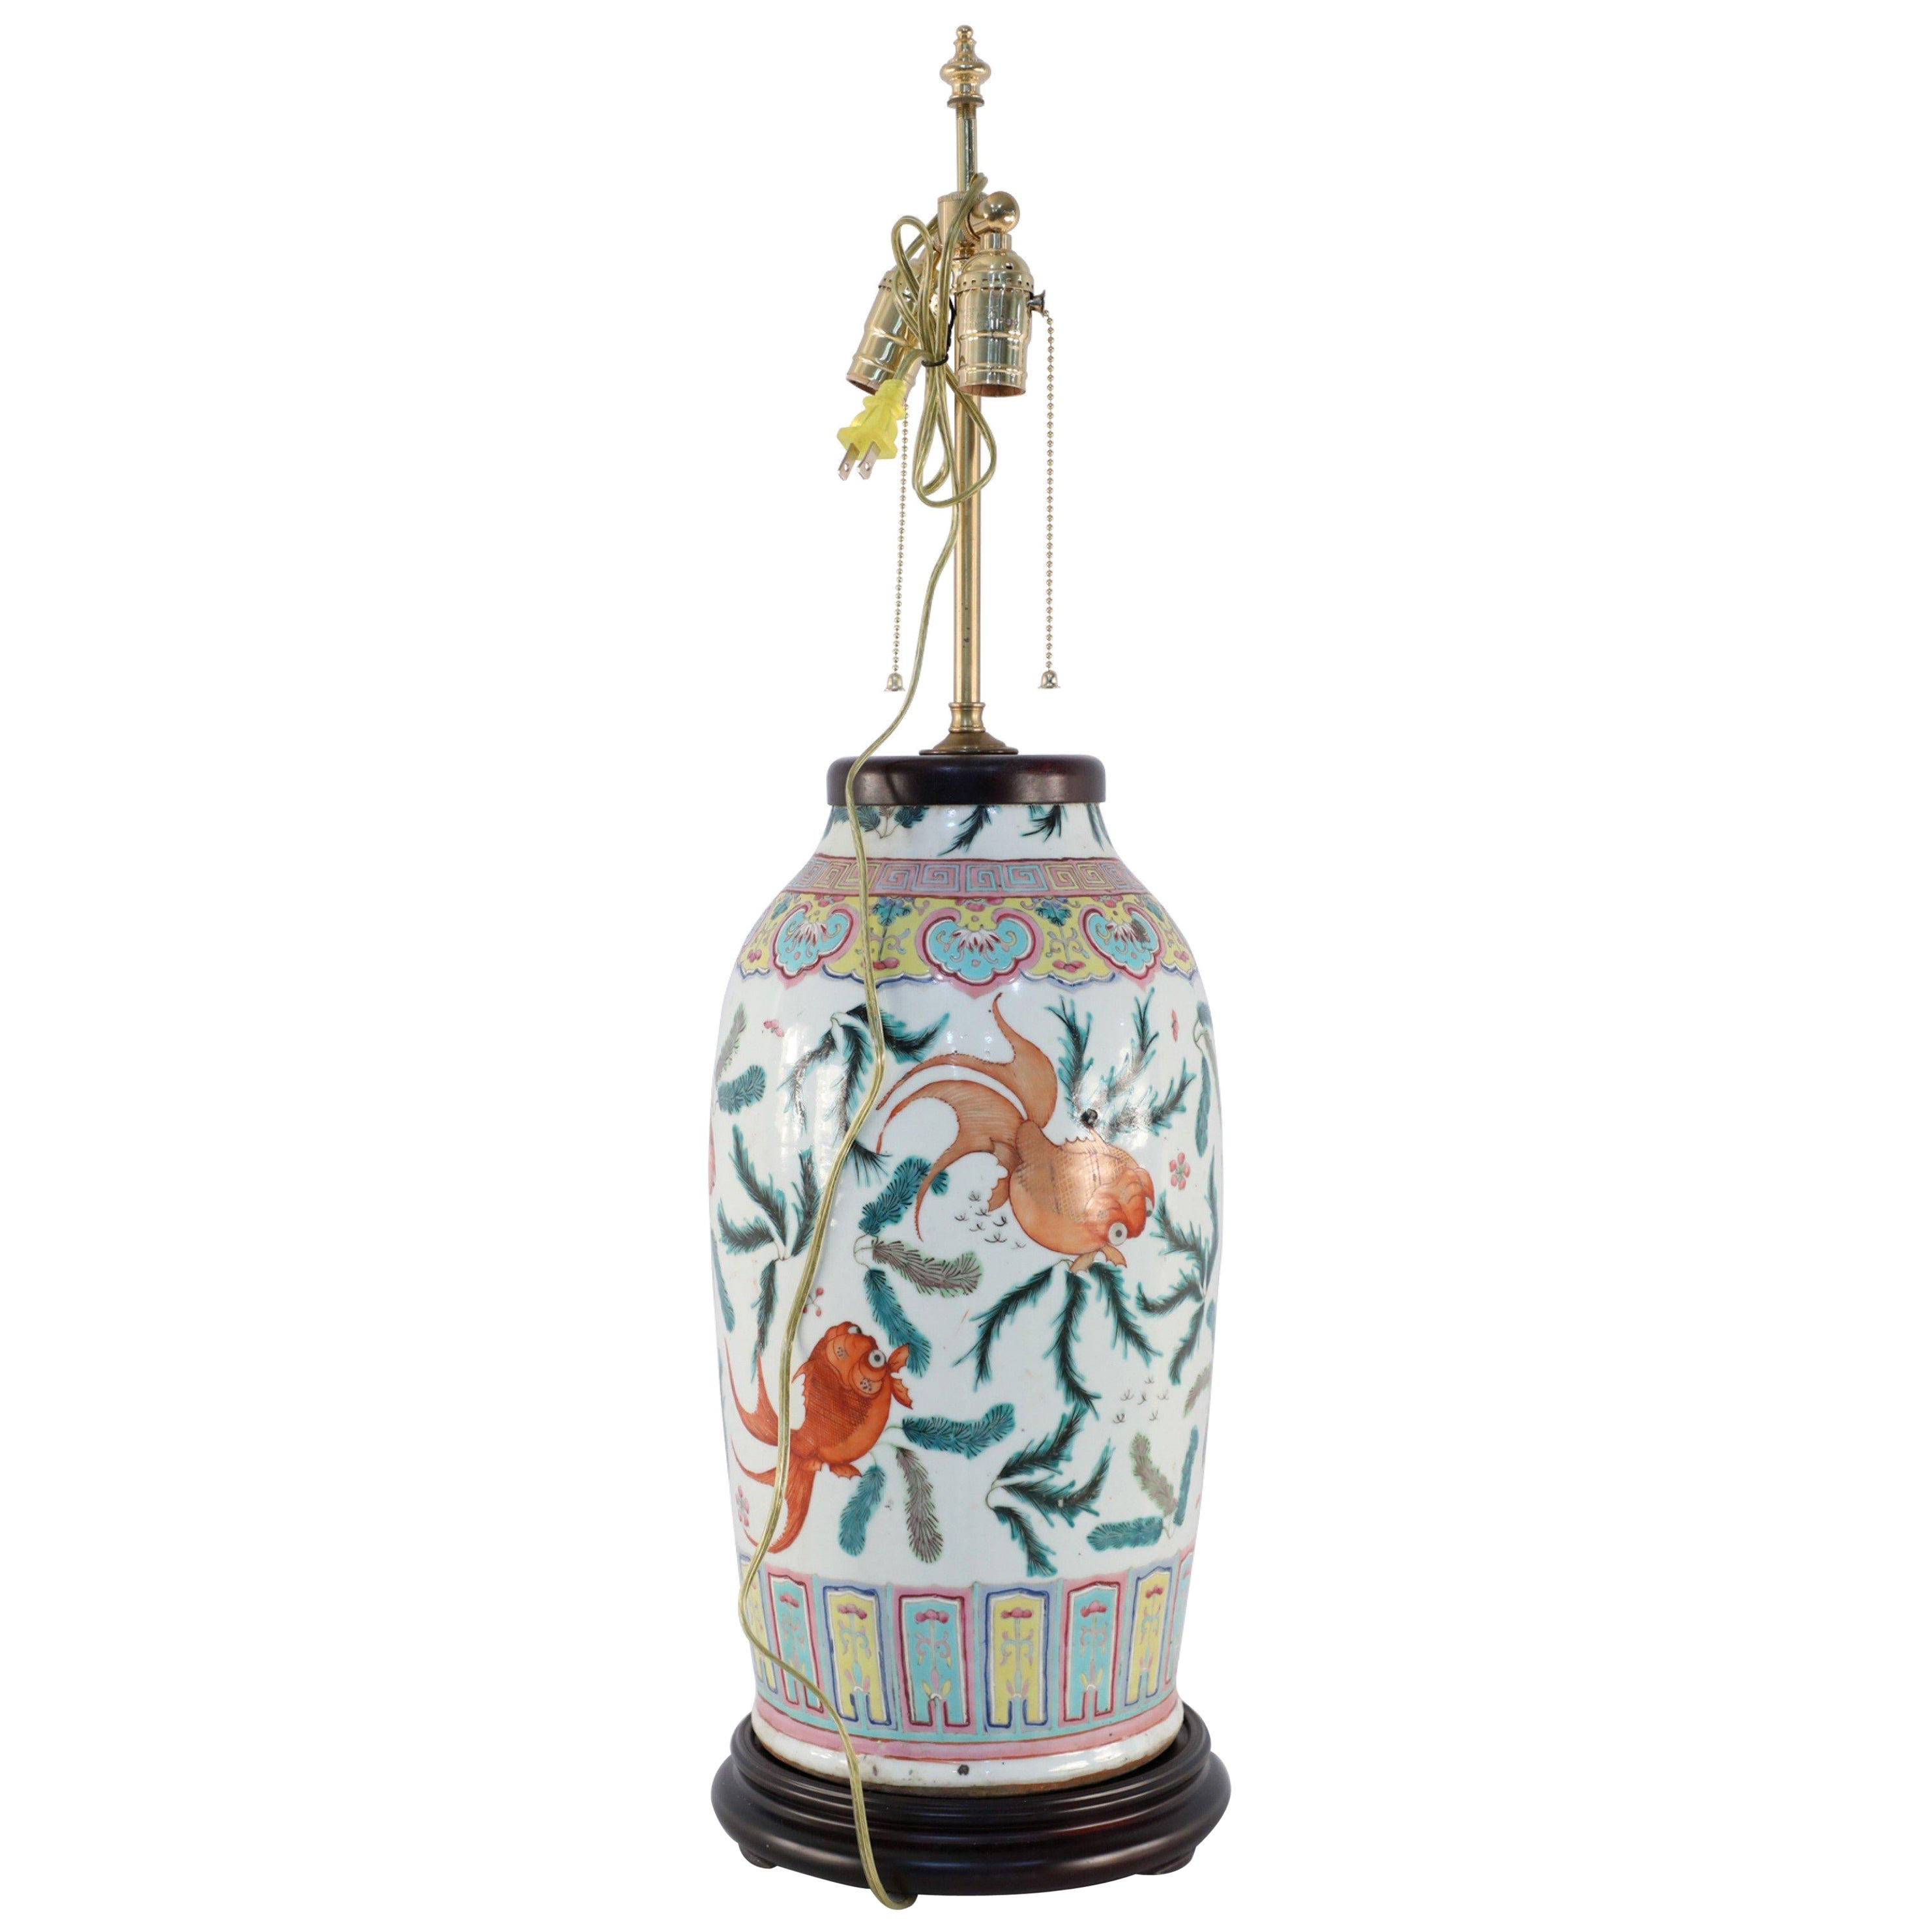 Chinese Ceramic Cream, Orange, and Green Fish Motif Porcelain Table Lamp For Sale